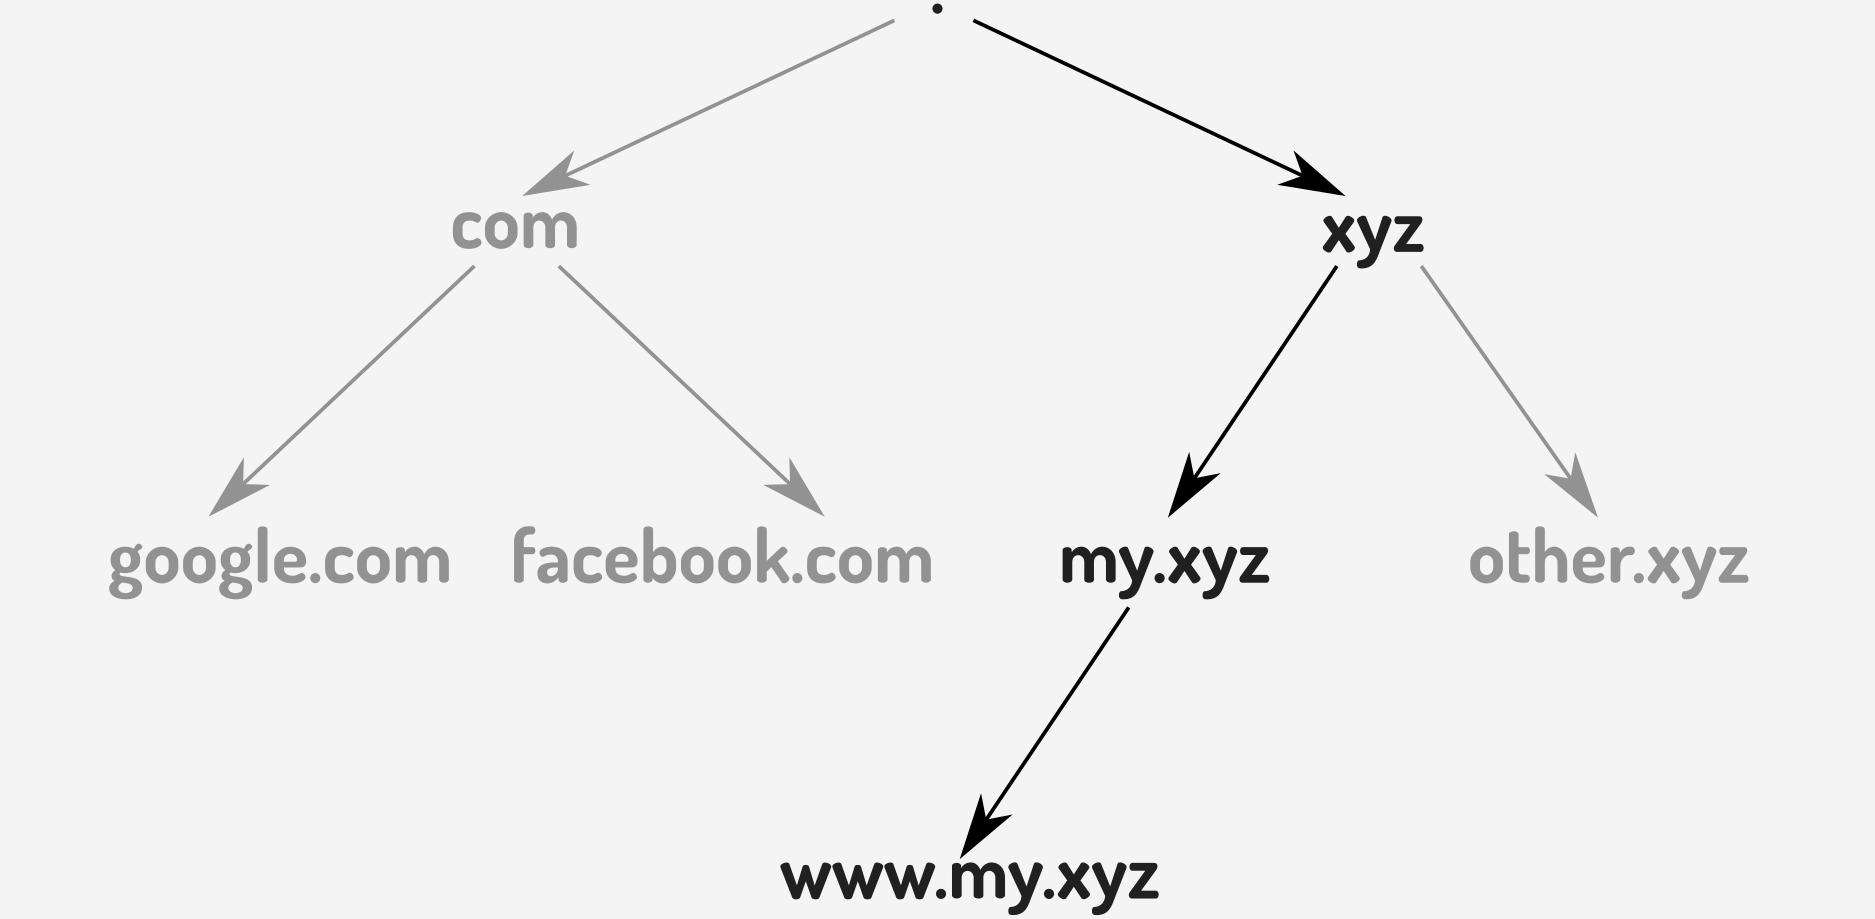 DNS hierarchy showing the path from the DNS root to www.my.xyz